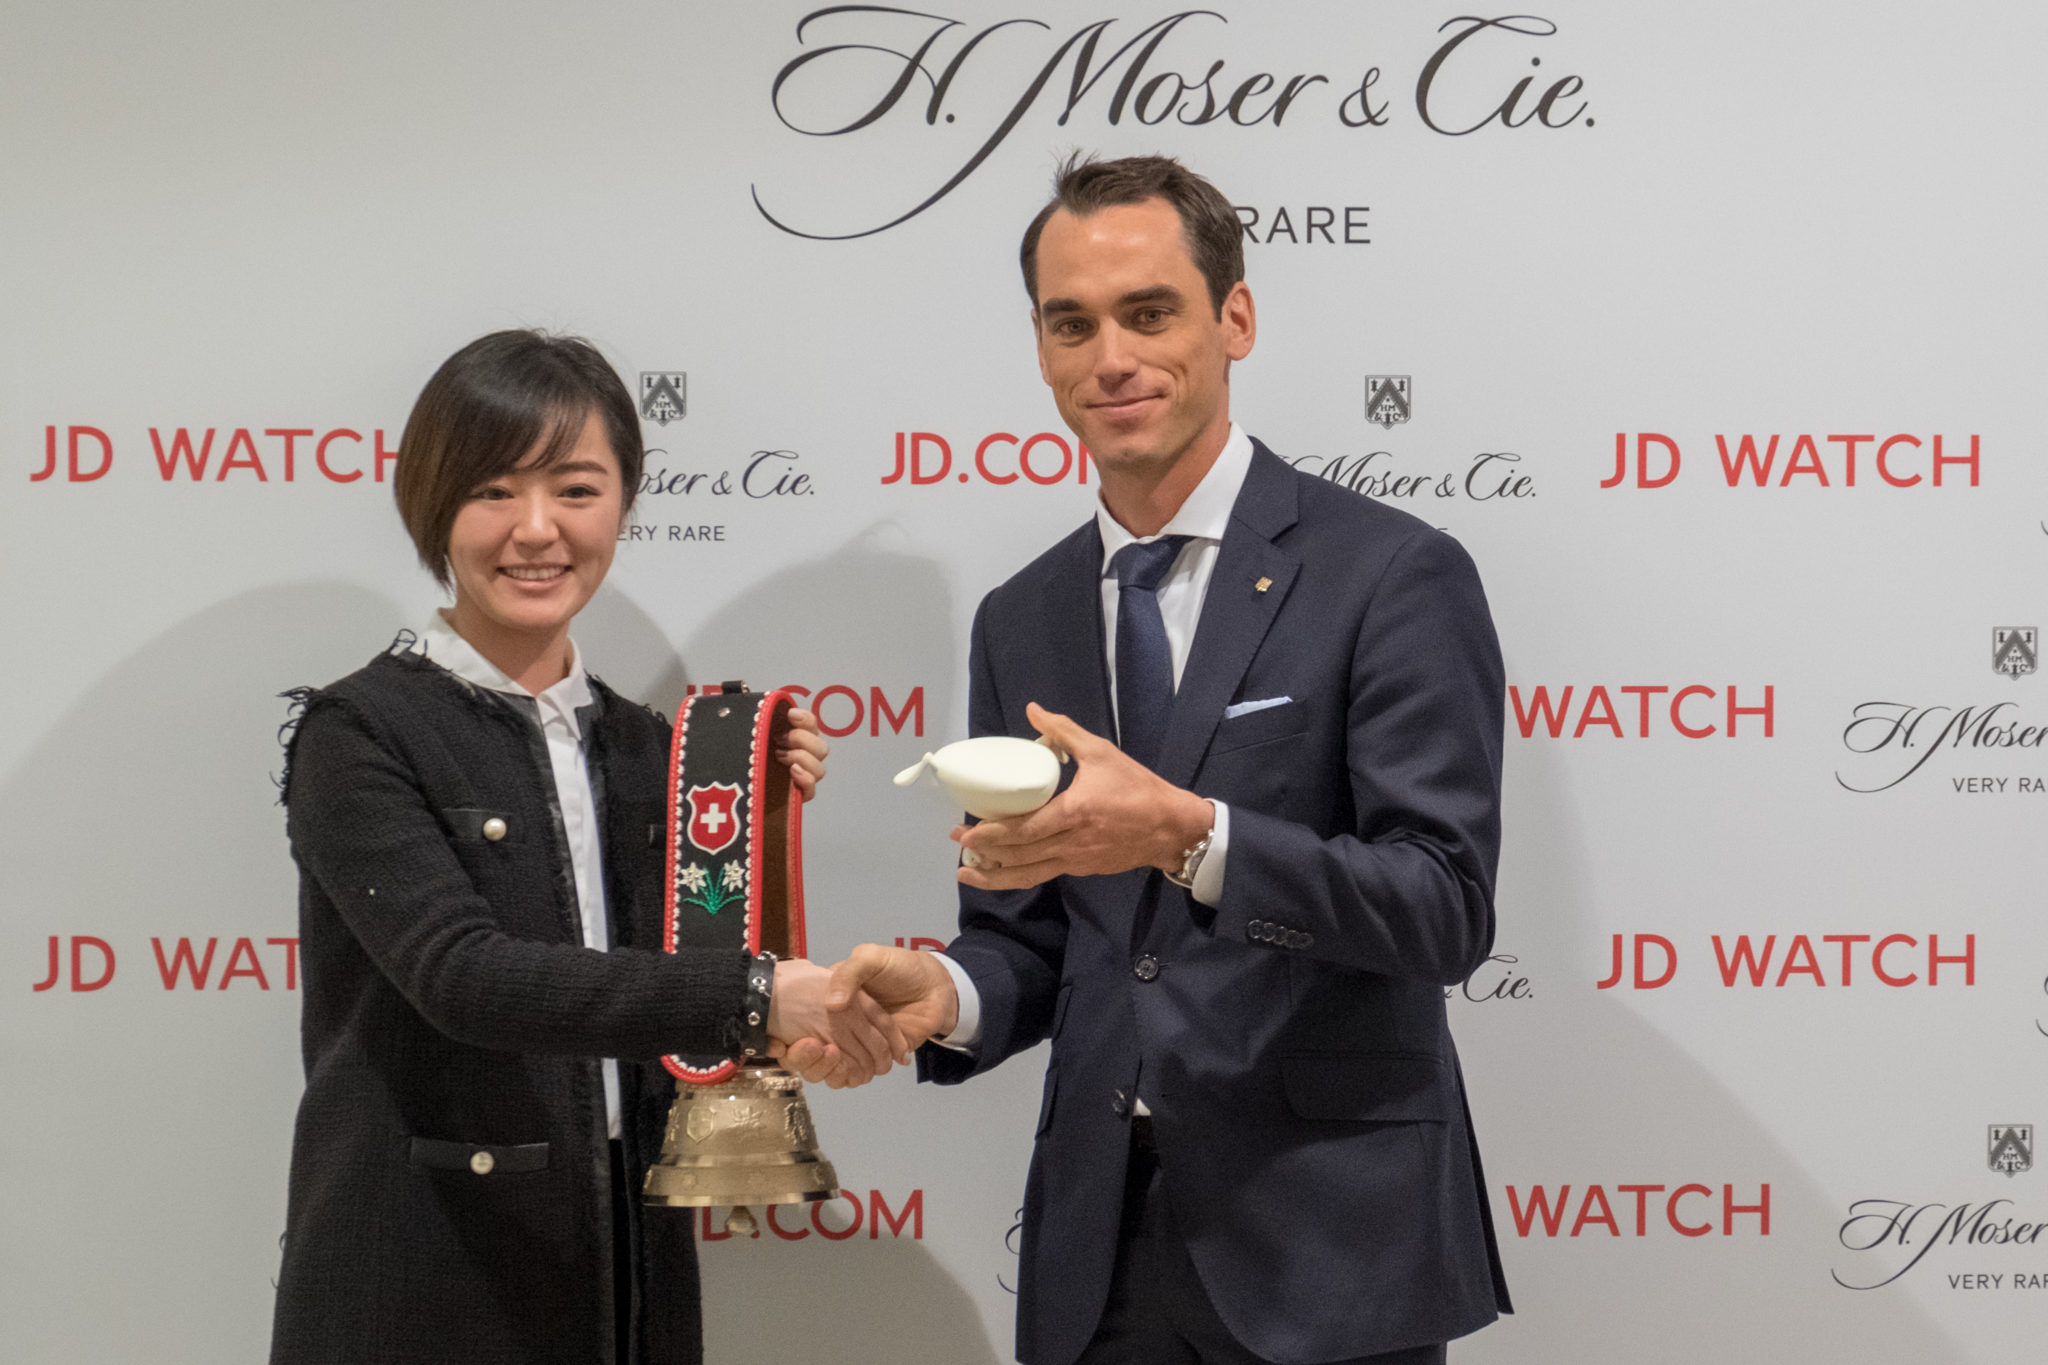 Moser & Cie. Joins Growing List Of Luxury Brands To Embrace Online Sales